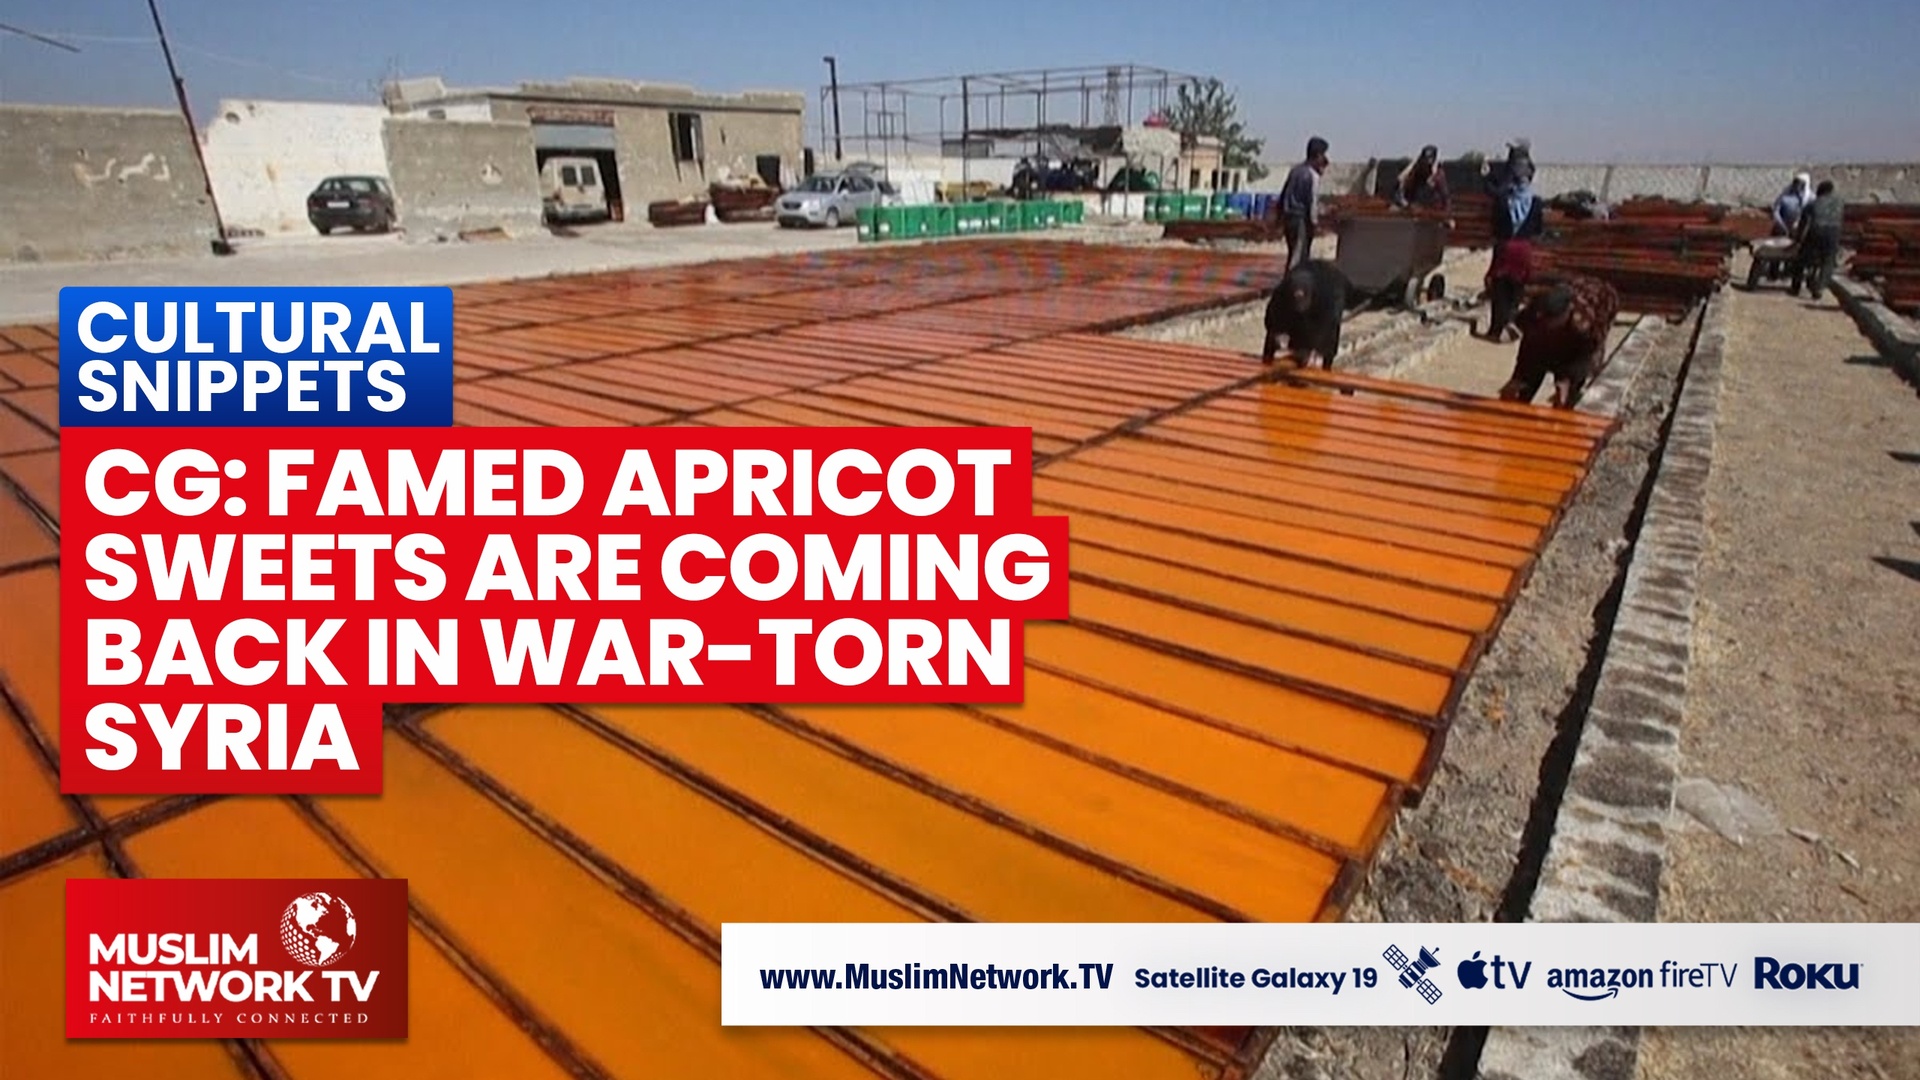 Famed Apricot Sweets Are Coming Back In War-Torn Syria